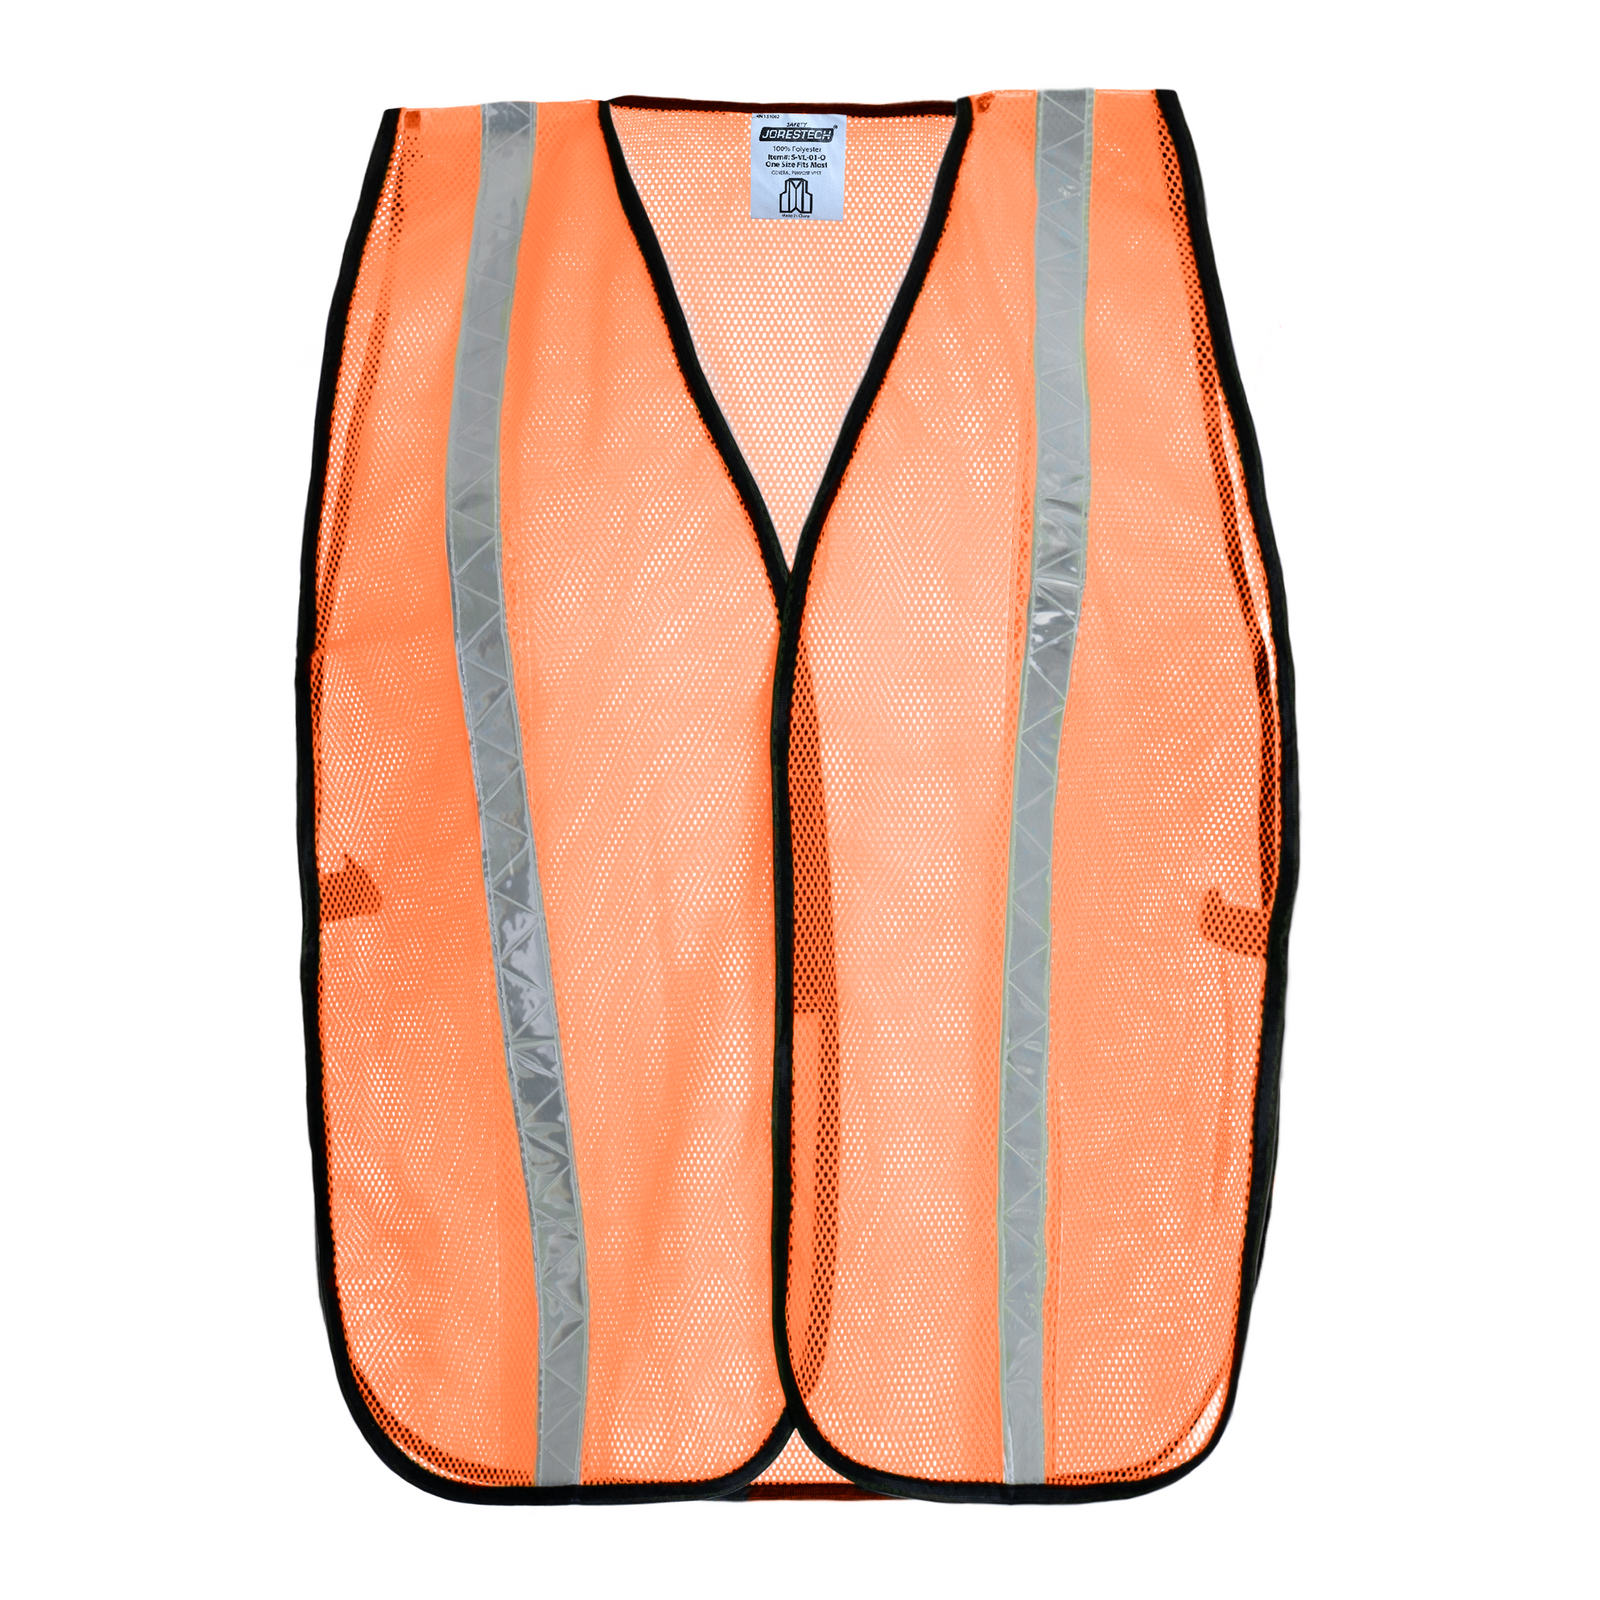 Front view of an orange hi visibility JORESTECH® mesh safety vest with 1 inch reflective strip and black side elastic straps